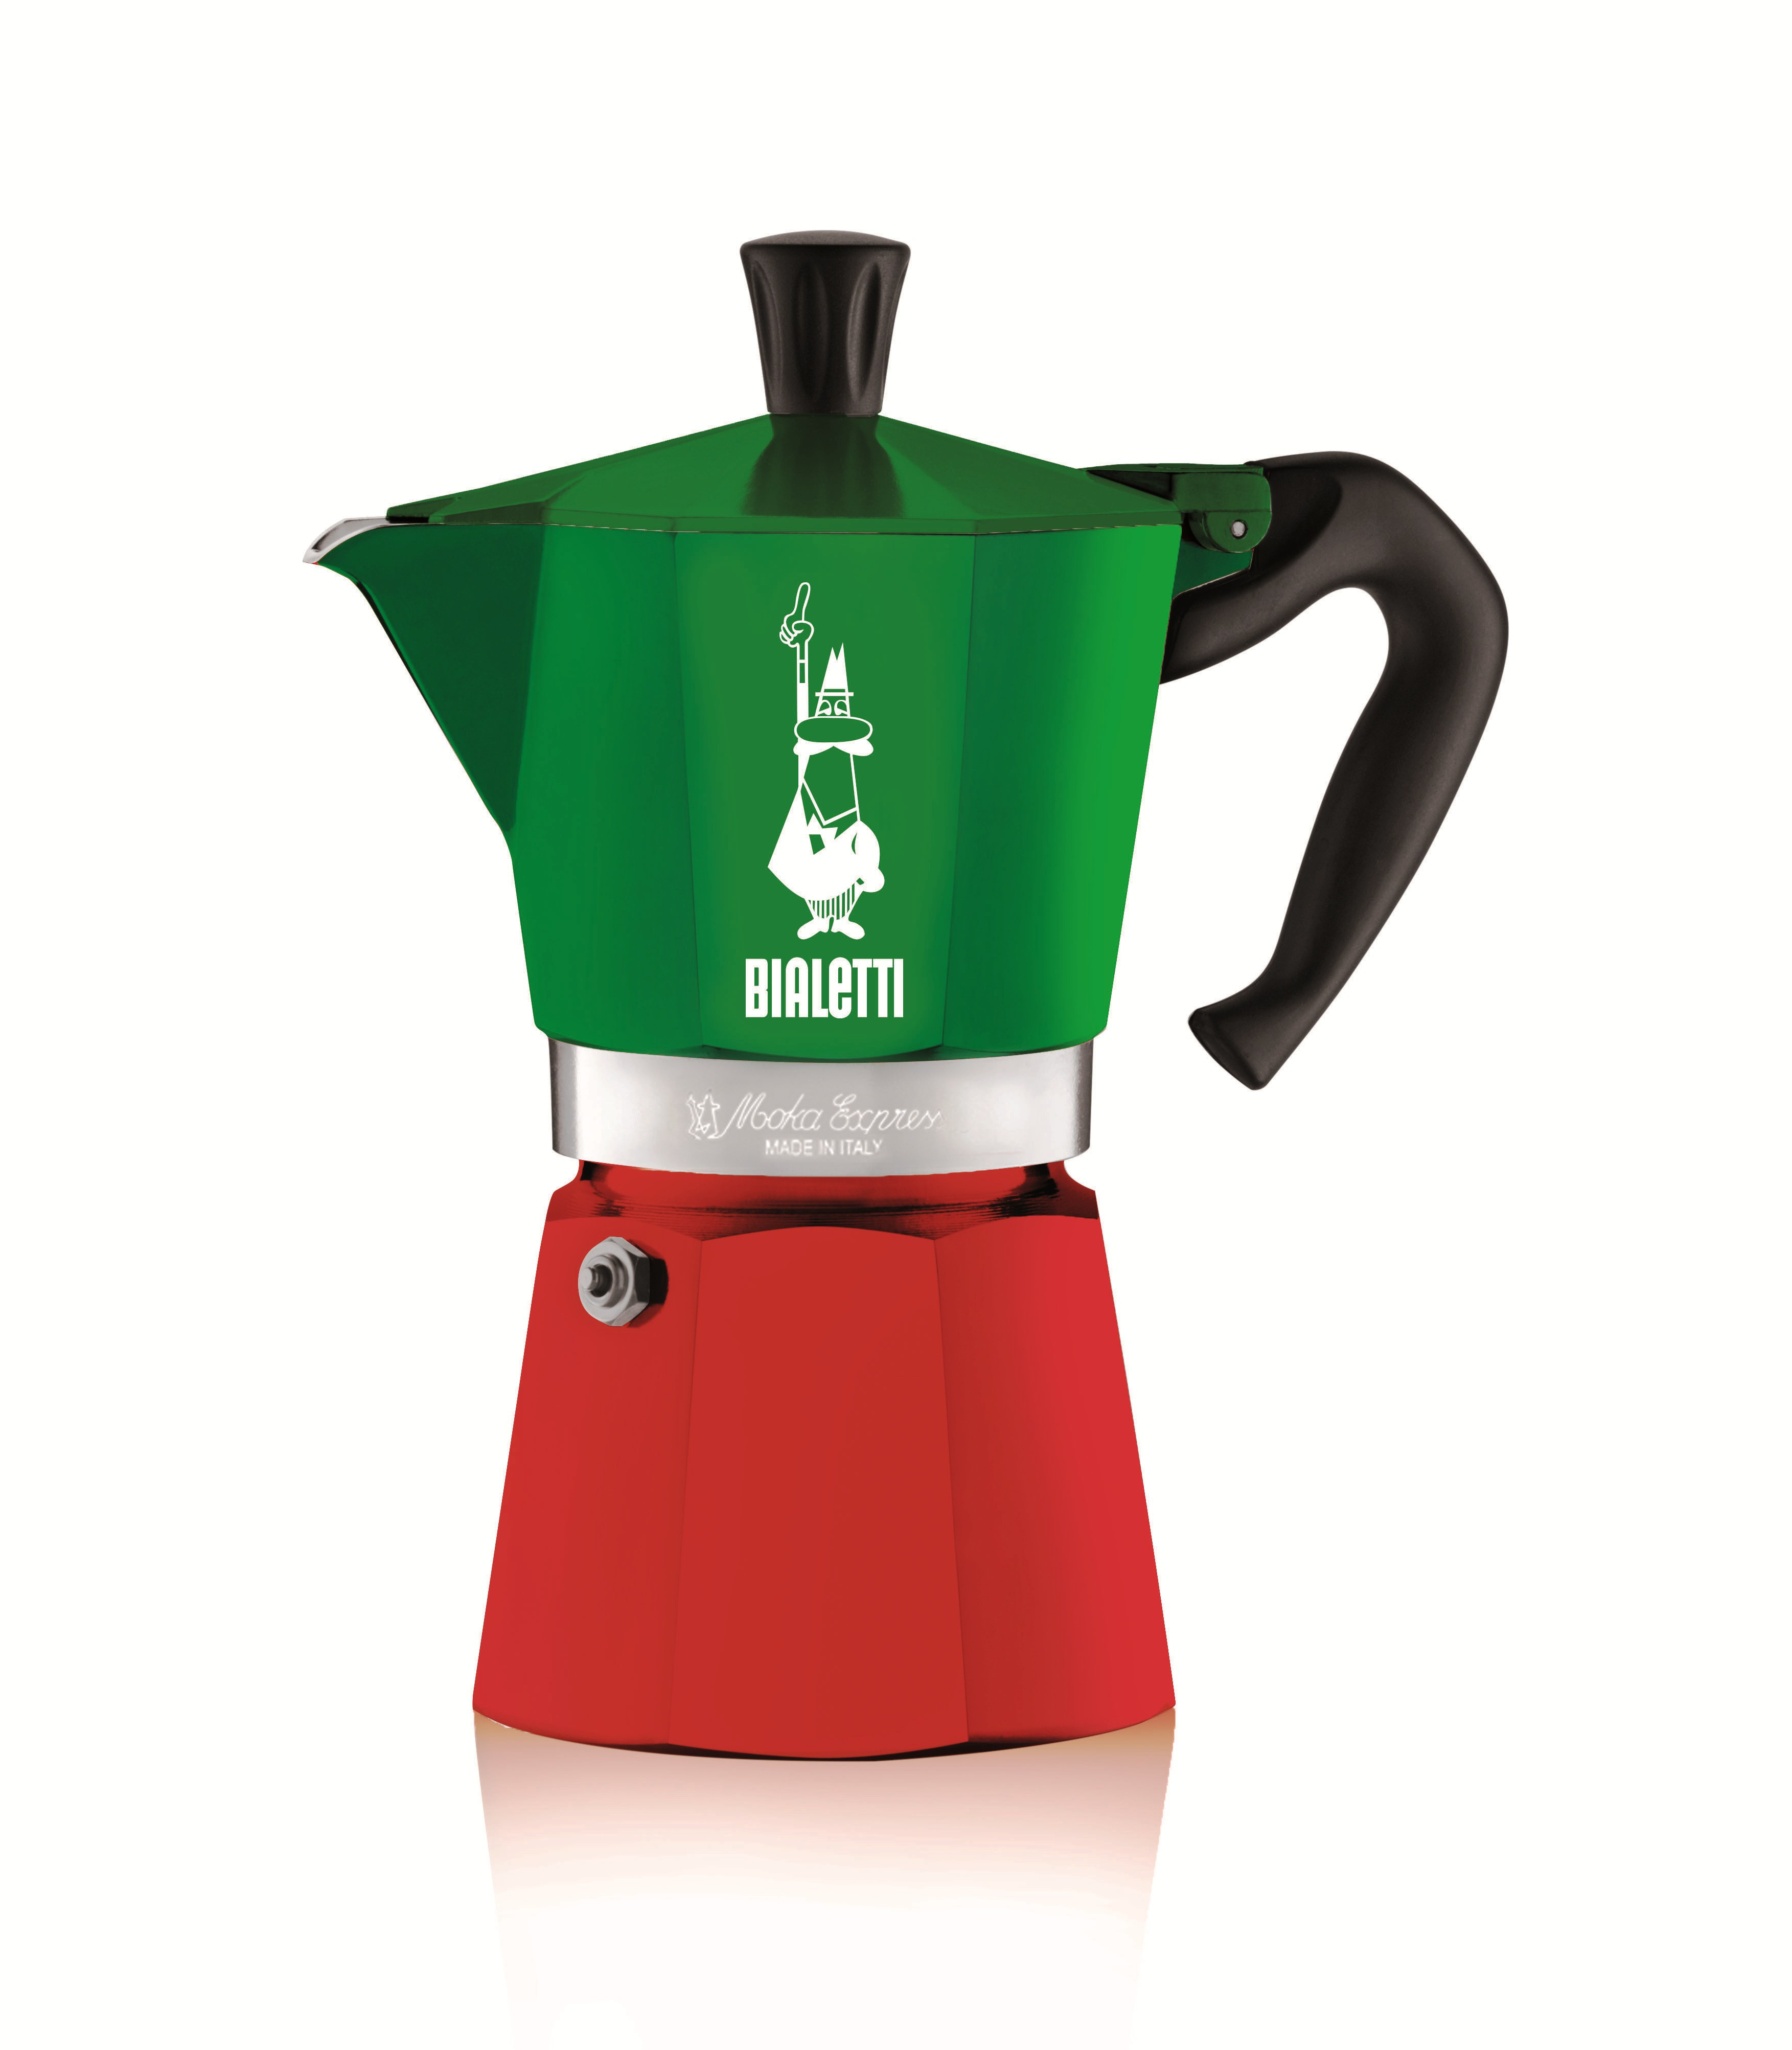 Bialetti - Moka Express Tricolore 6 cups, Multicolor, large image number 0